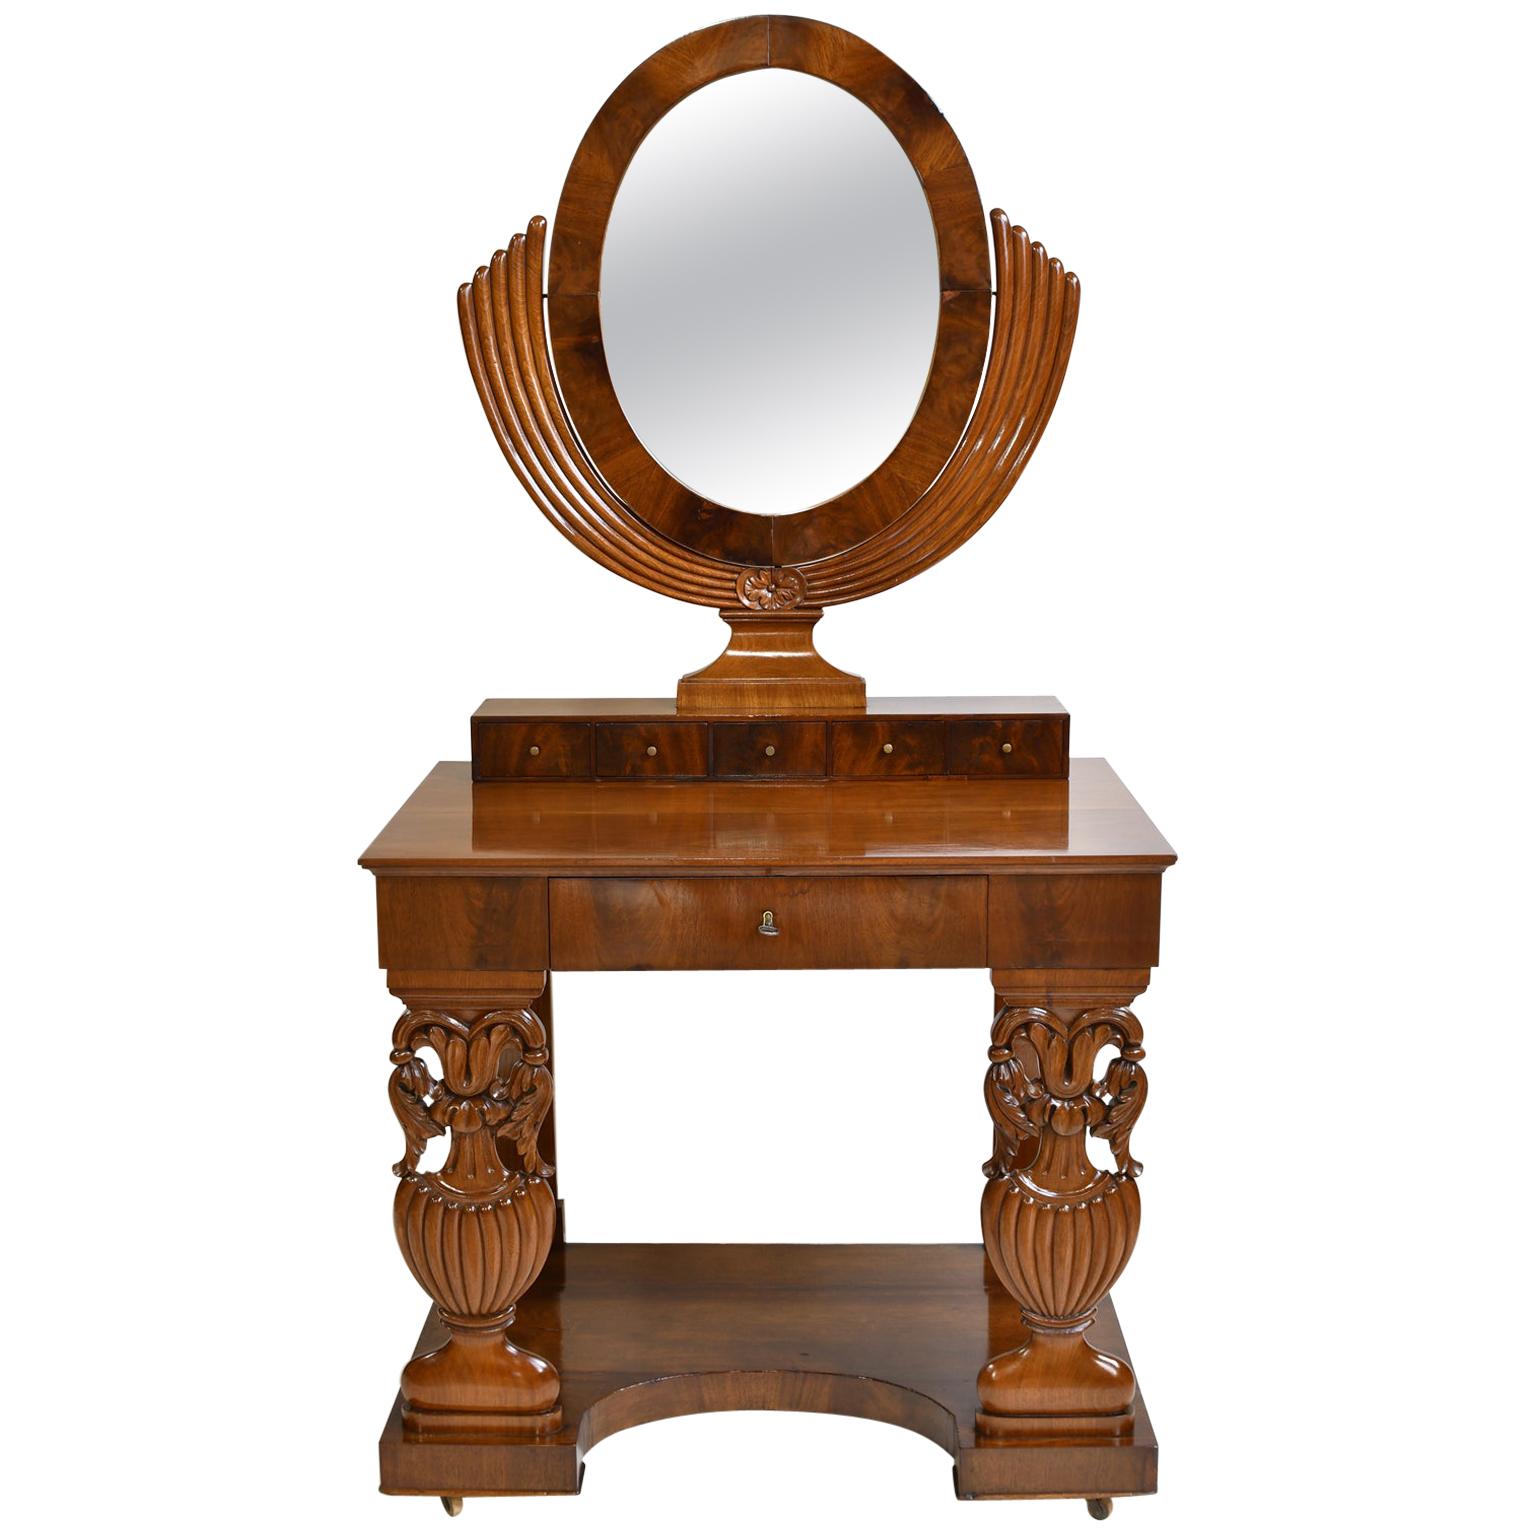 North German Biedermeier Dressing/ Console Table in Mahogany with Mirror, c 1825